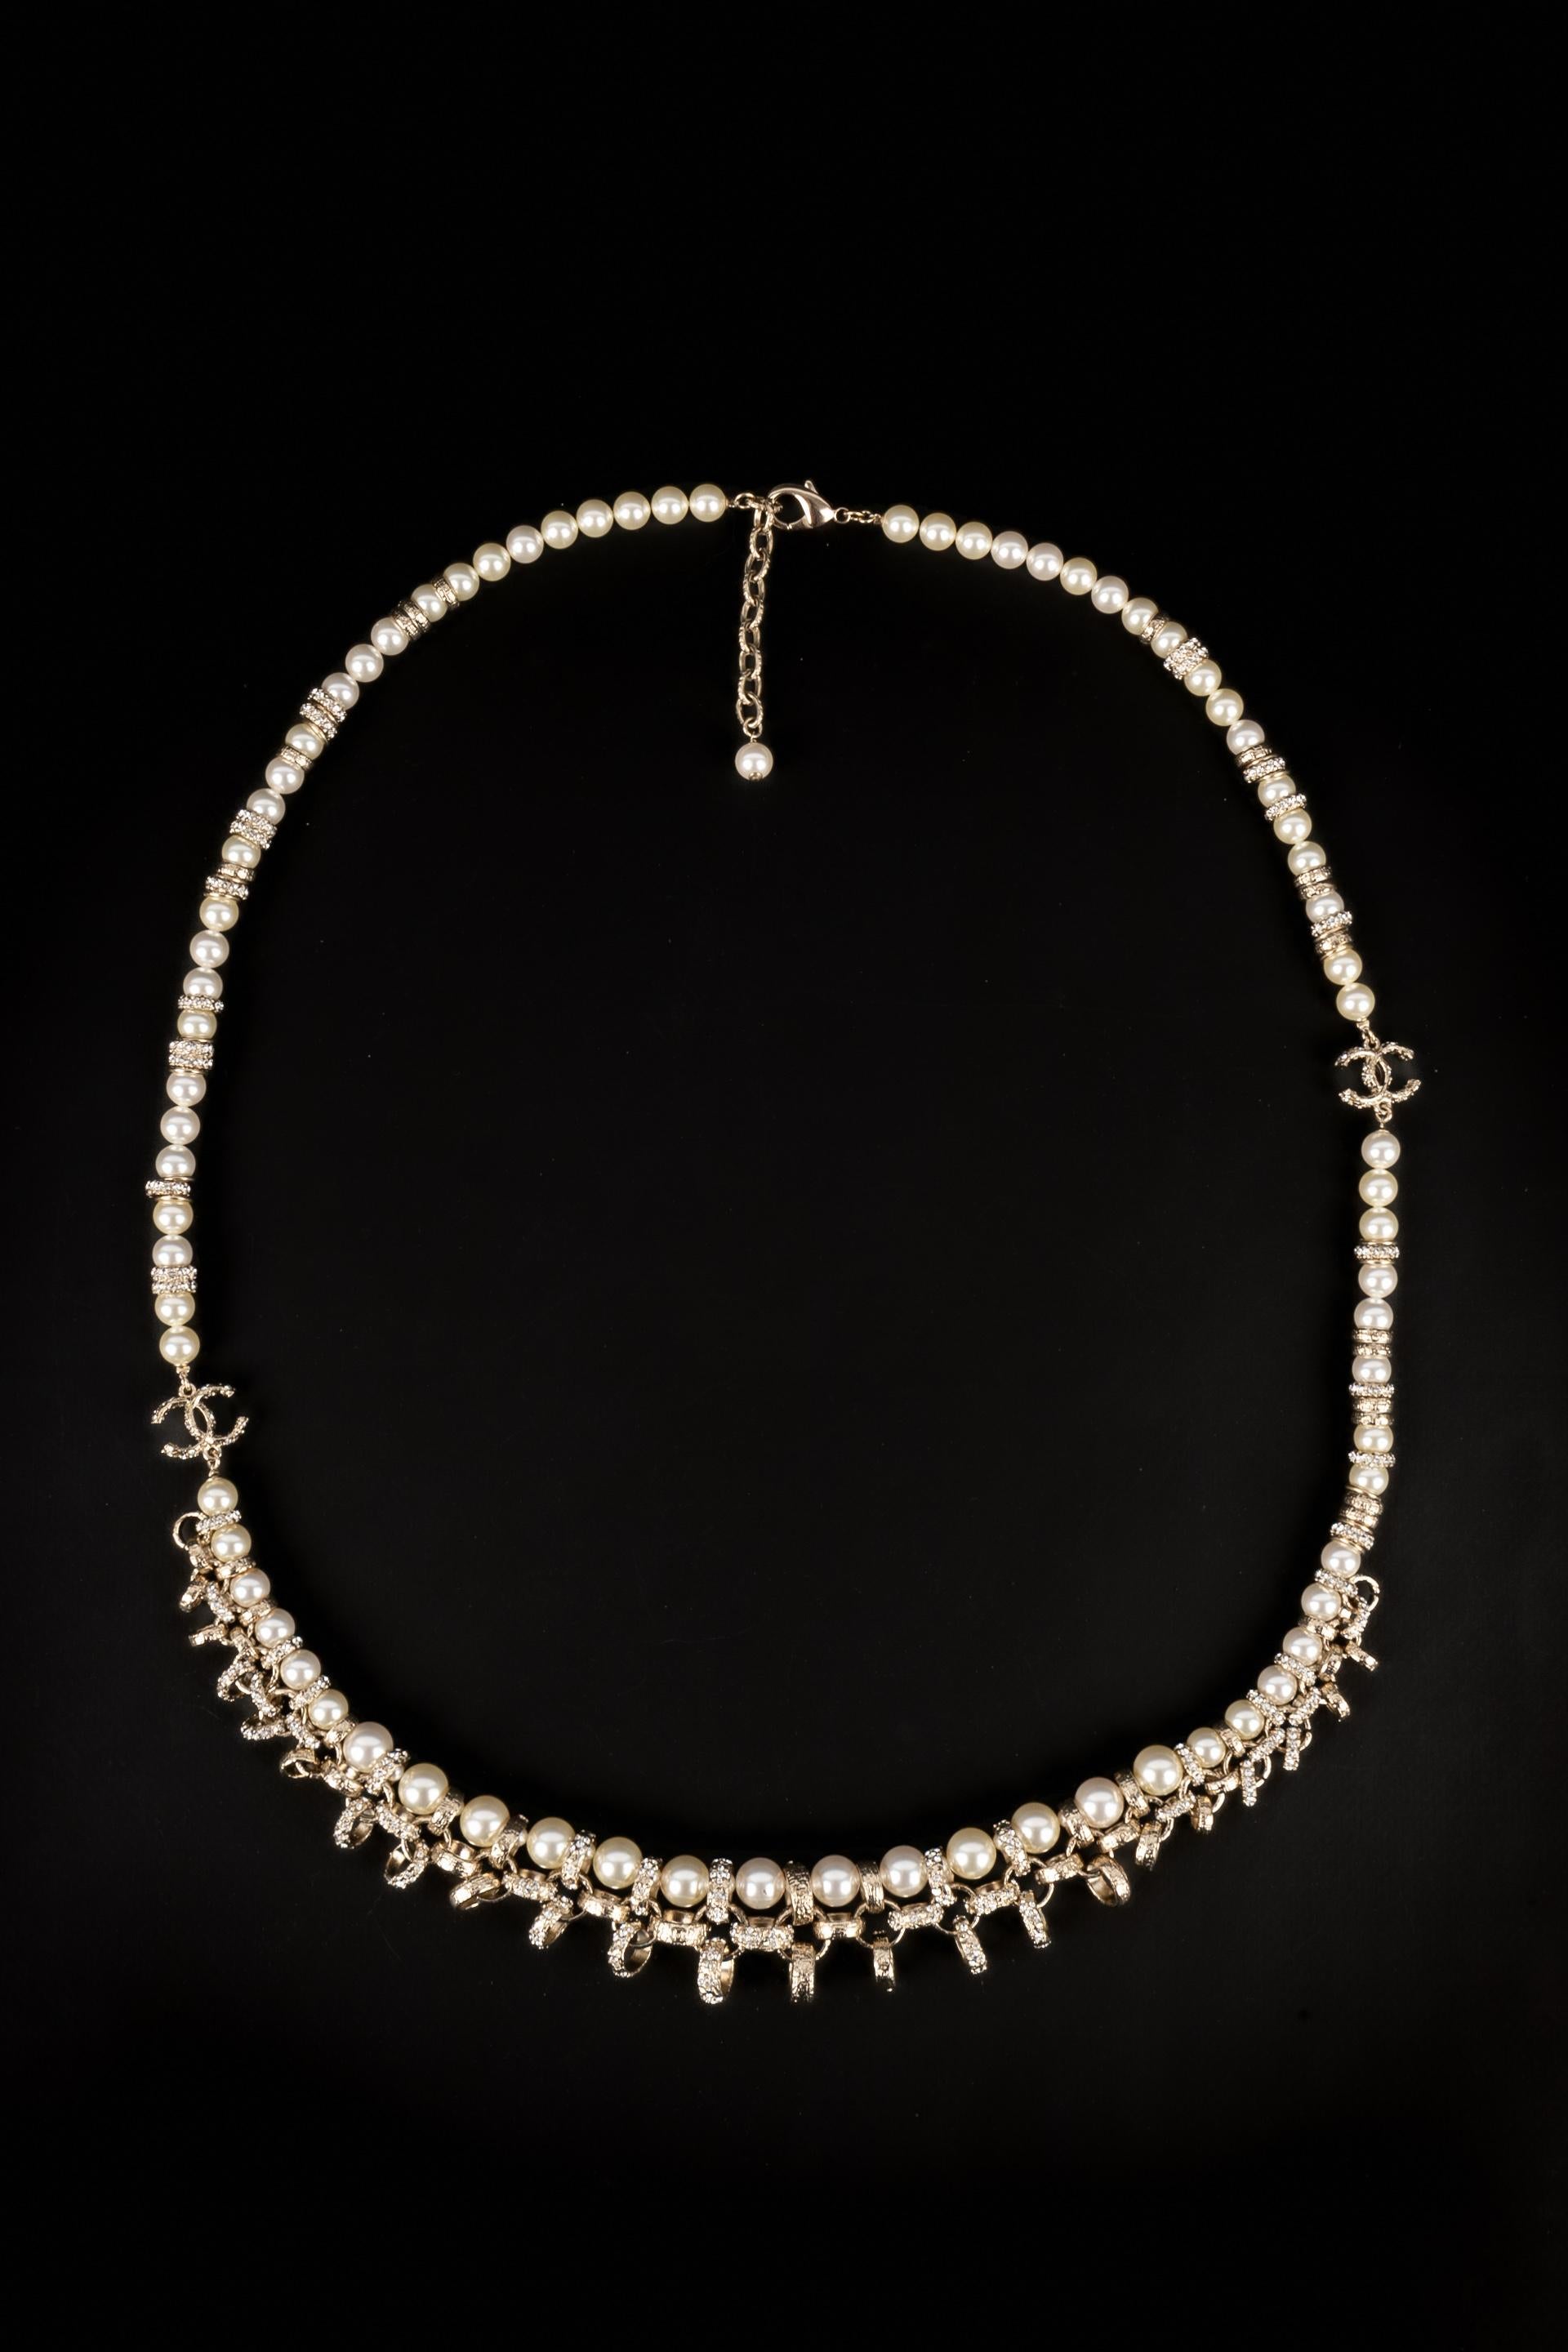 CHANEL - (Made in France) Champagne metal necklace with costume pearls and rhinestones. 2016 Collection.

Condition:
Very good condition

Dimensions:
Length: from 88 cm to 93 cm

CB95